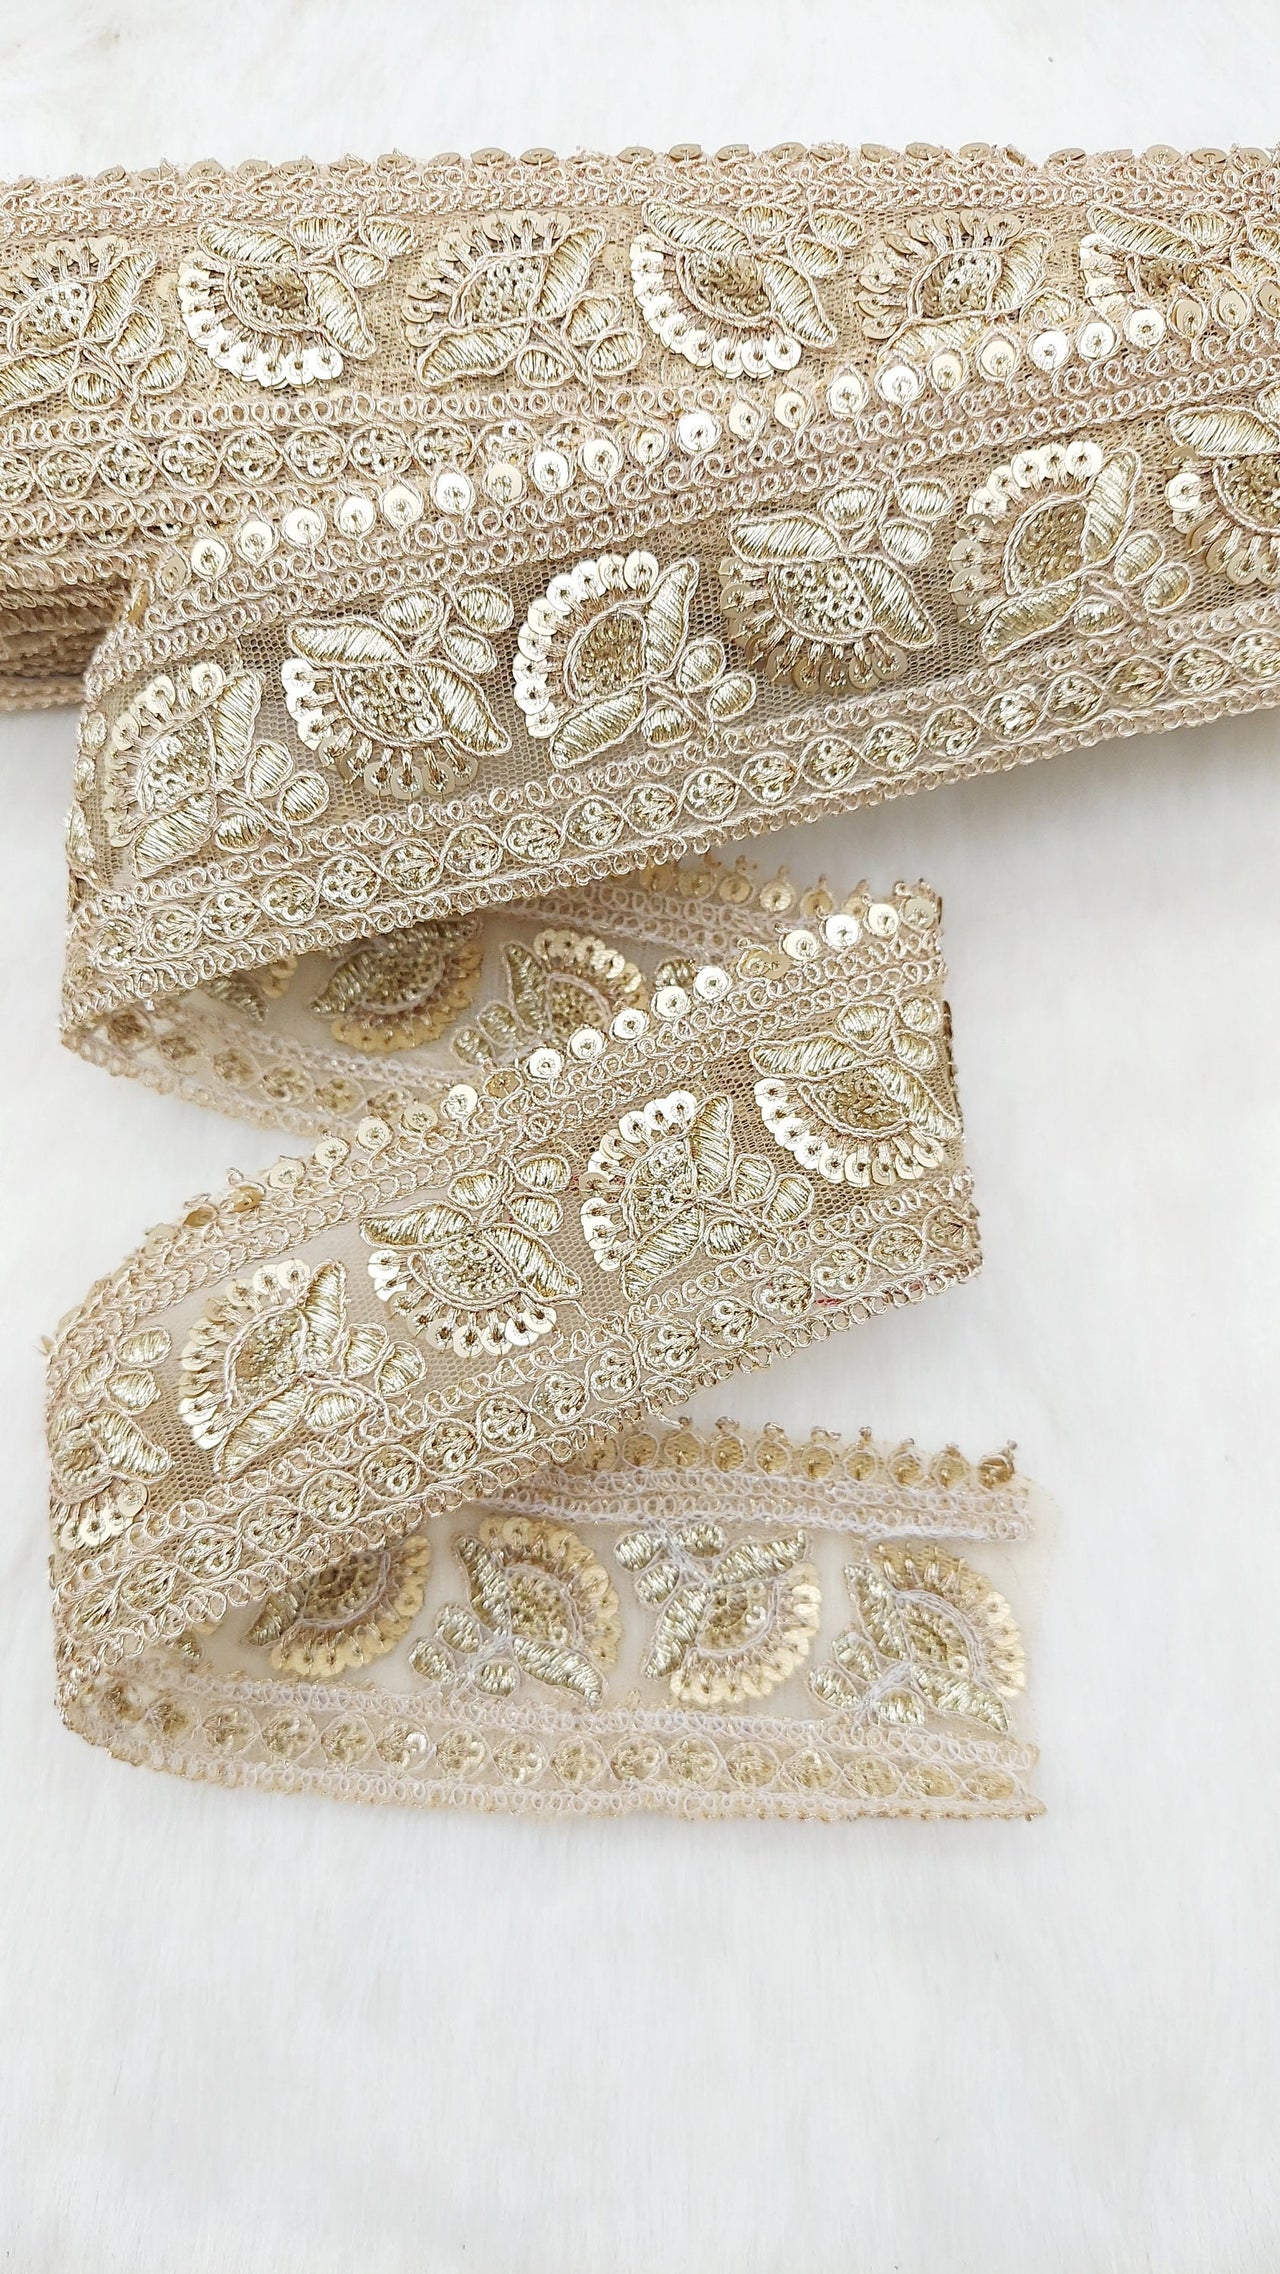 Gold Sequins Trim 2 Yards Decorative Floral Embroidered Lace Sari Border Costume Ribbon Crafting Sewing Tape